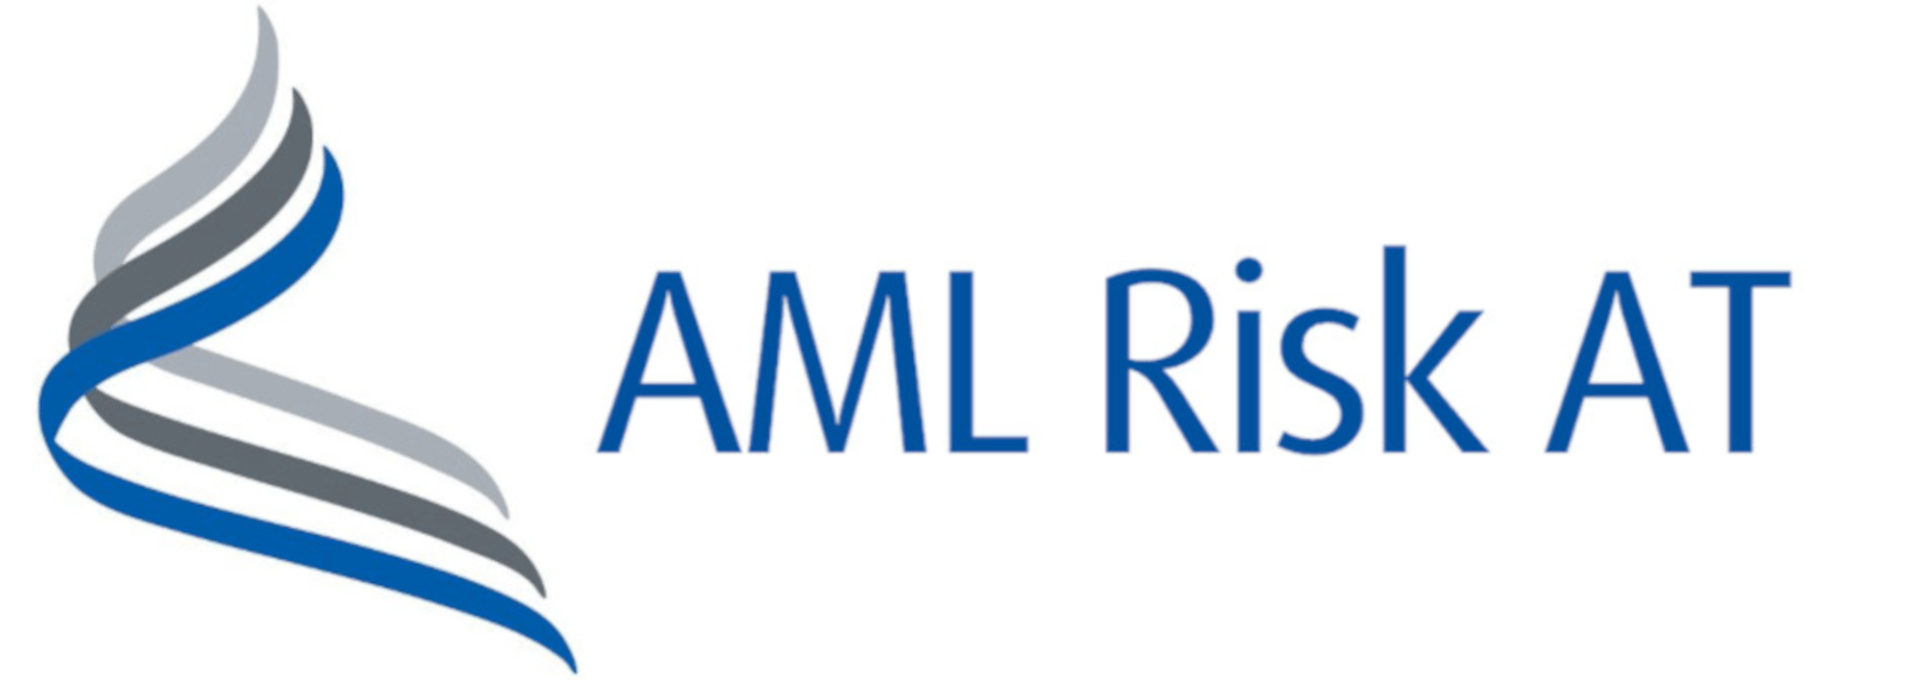 beuther AML Risk AT